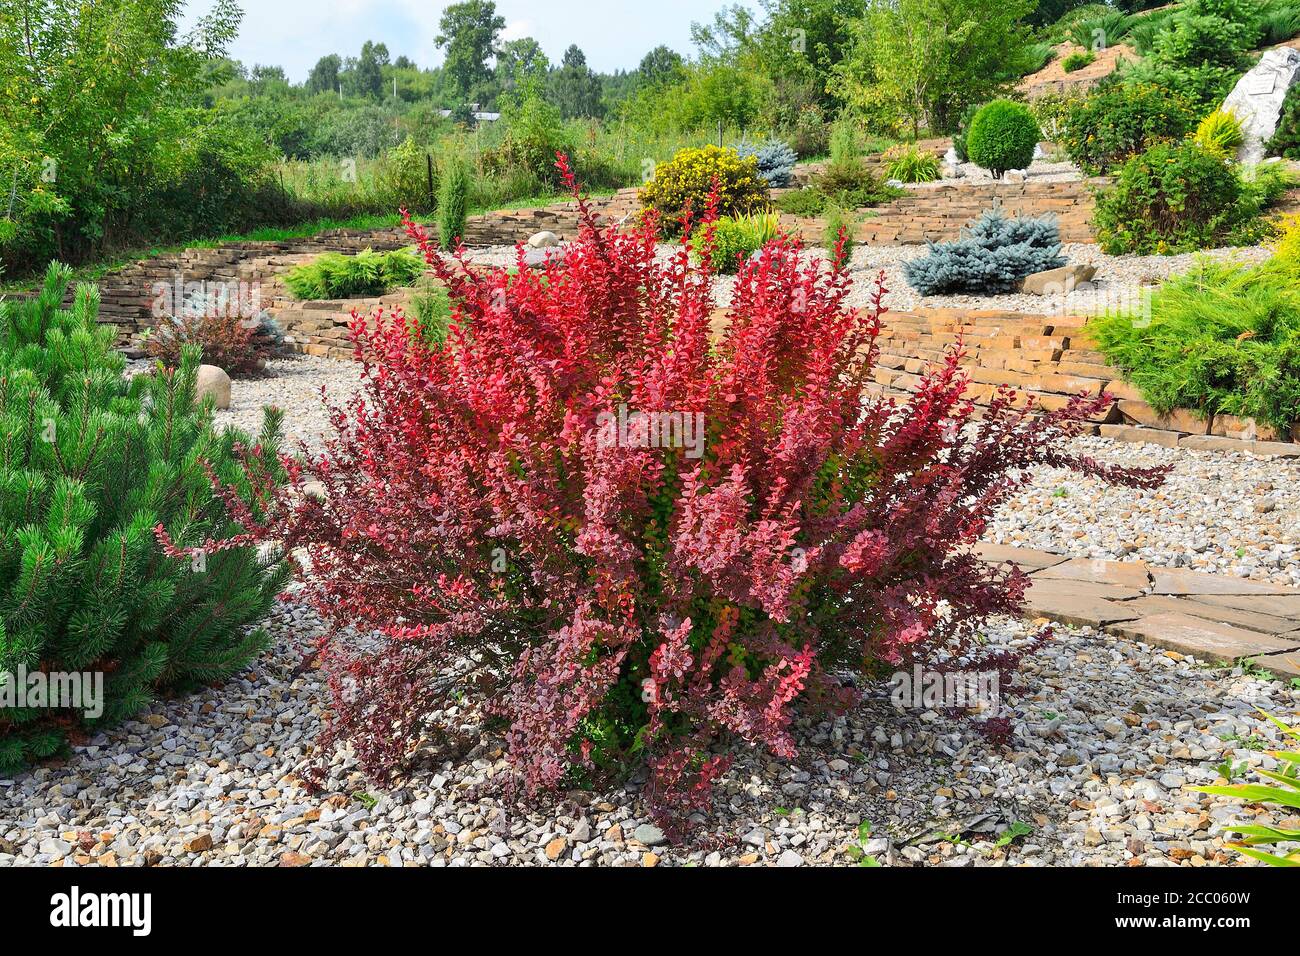 Cultivar Thunbergs barberry (Berberis thunbergii 'Red Rocket') in rocky garden. Bright ornamental bush with vivid red-burgundy leaves, focus is at for Stock Photo